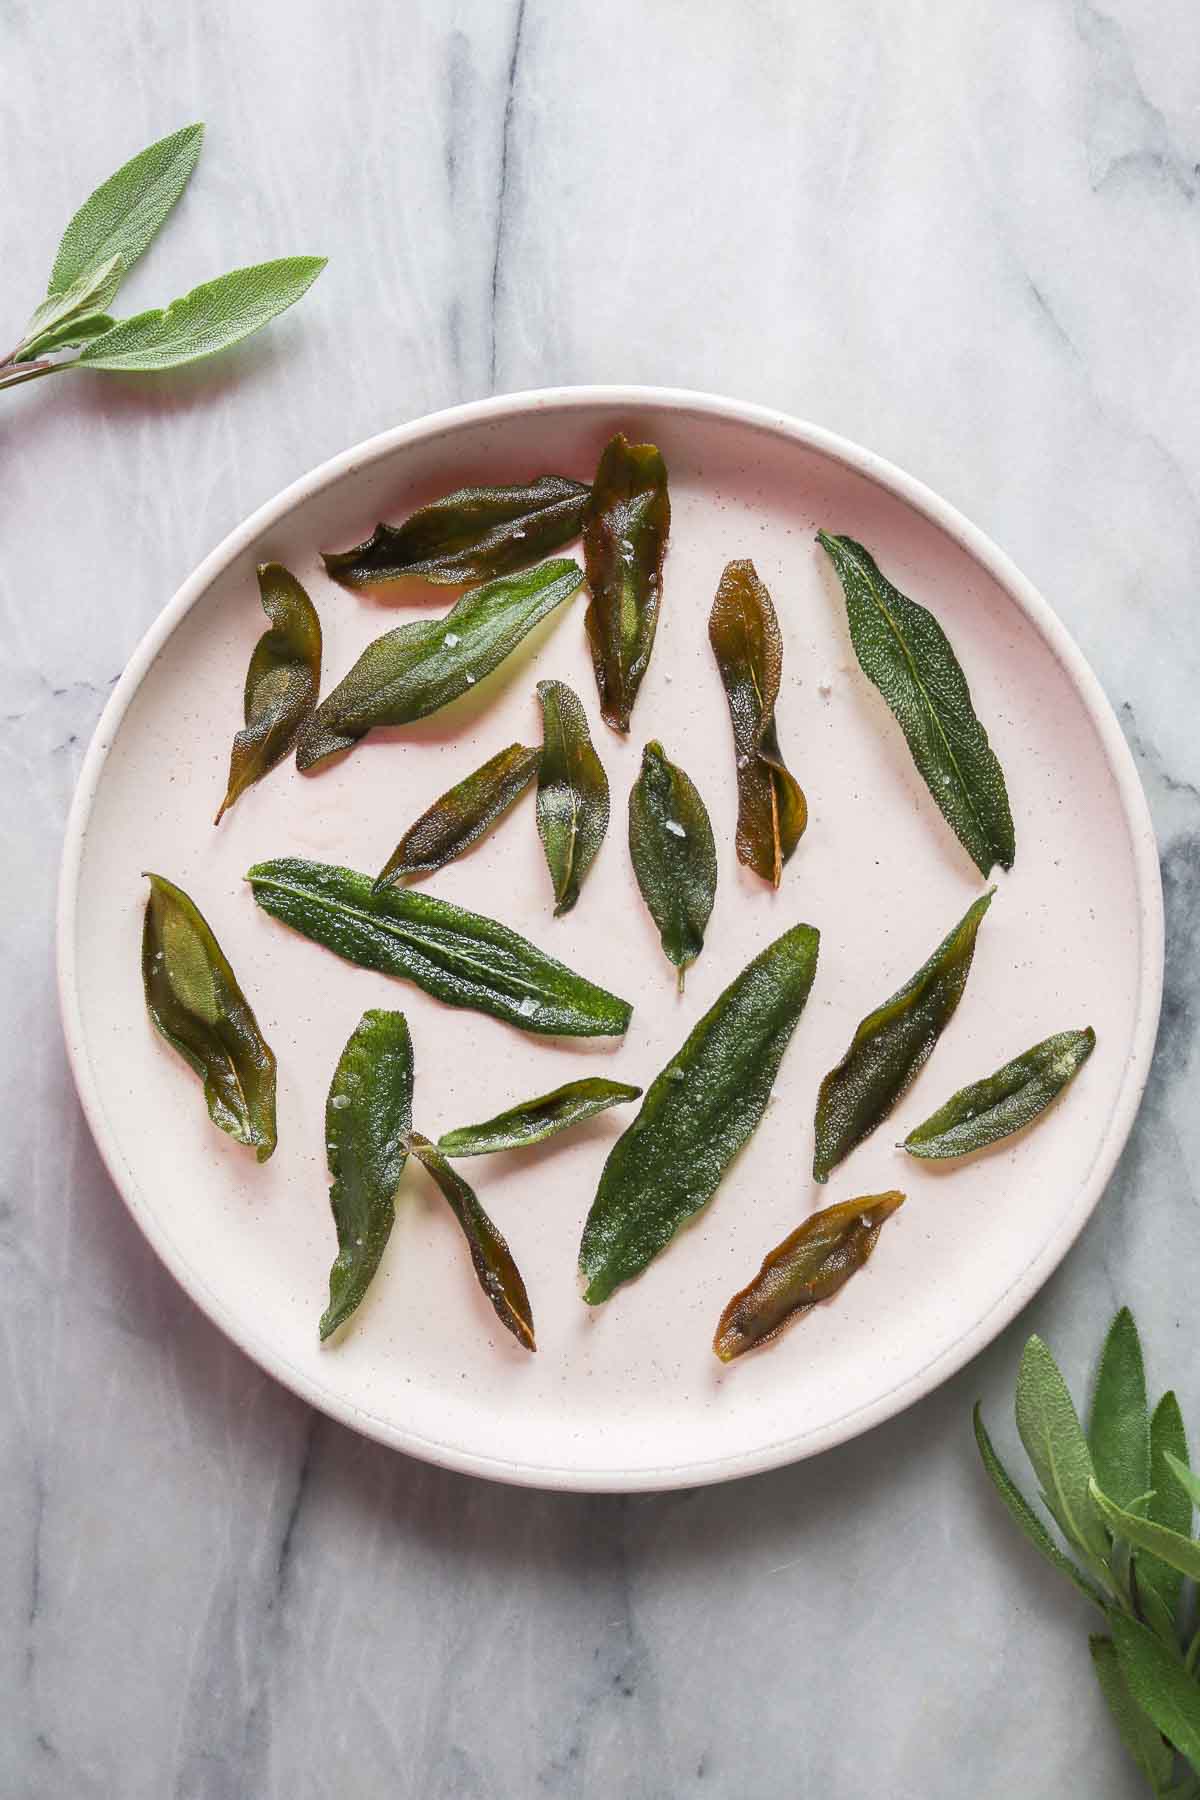 Crispy sage leaves on a plate surrounded by fresh sage leaves.